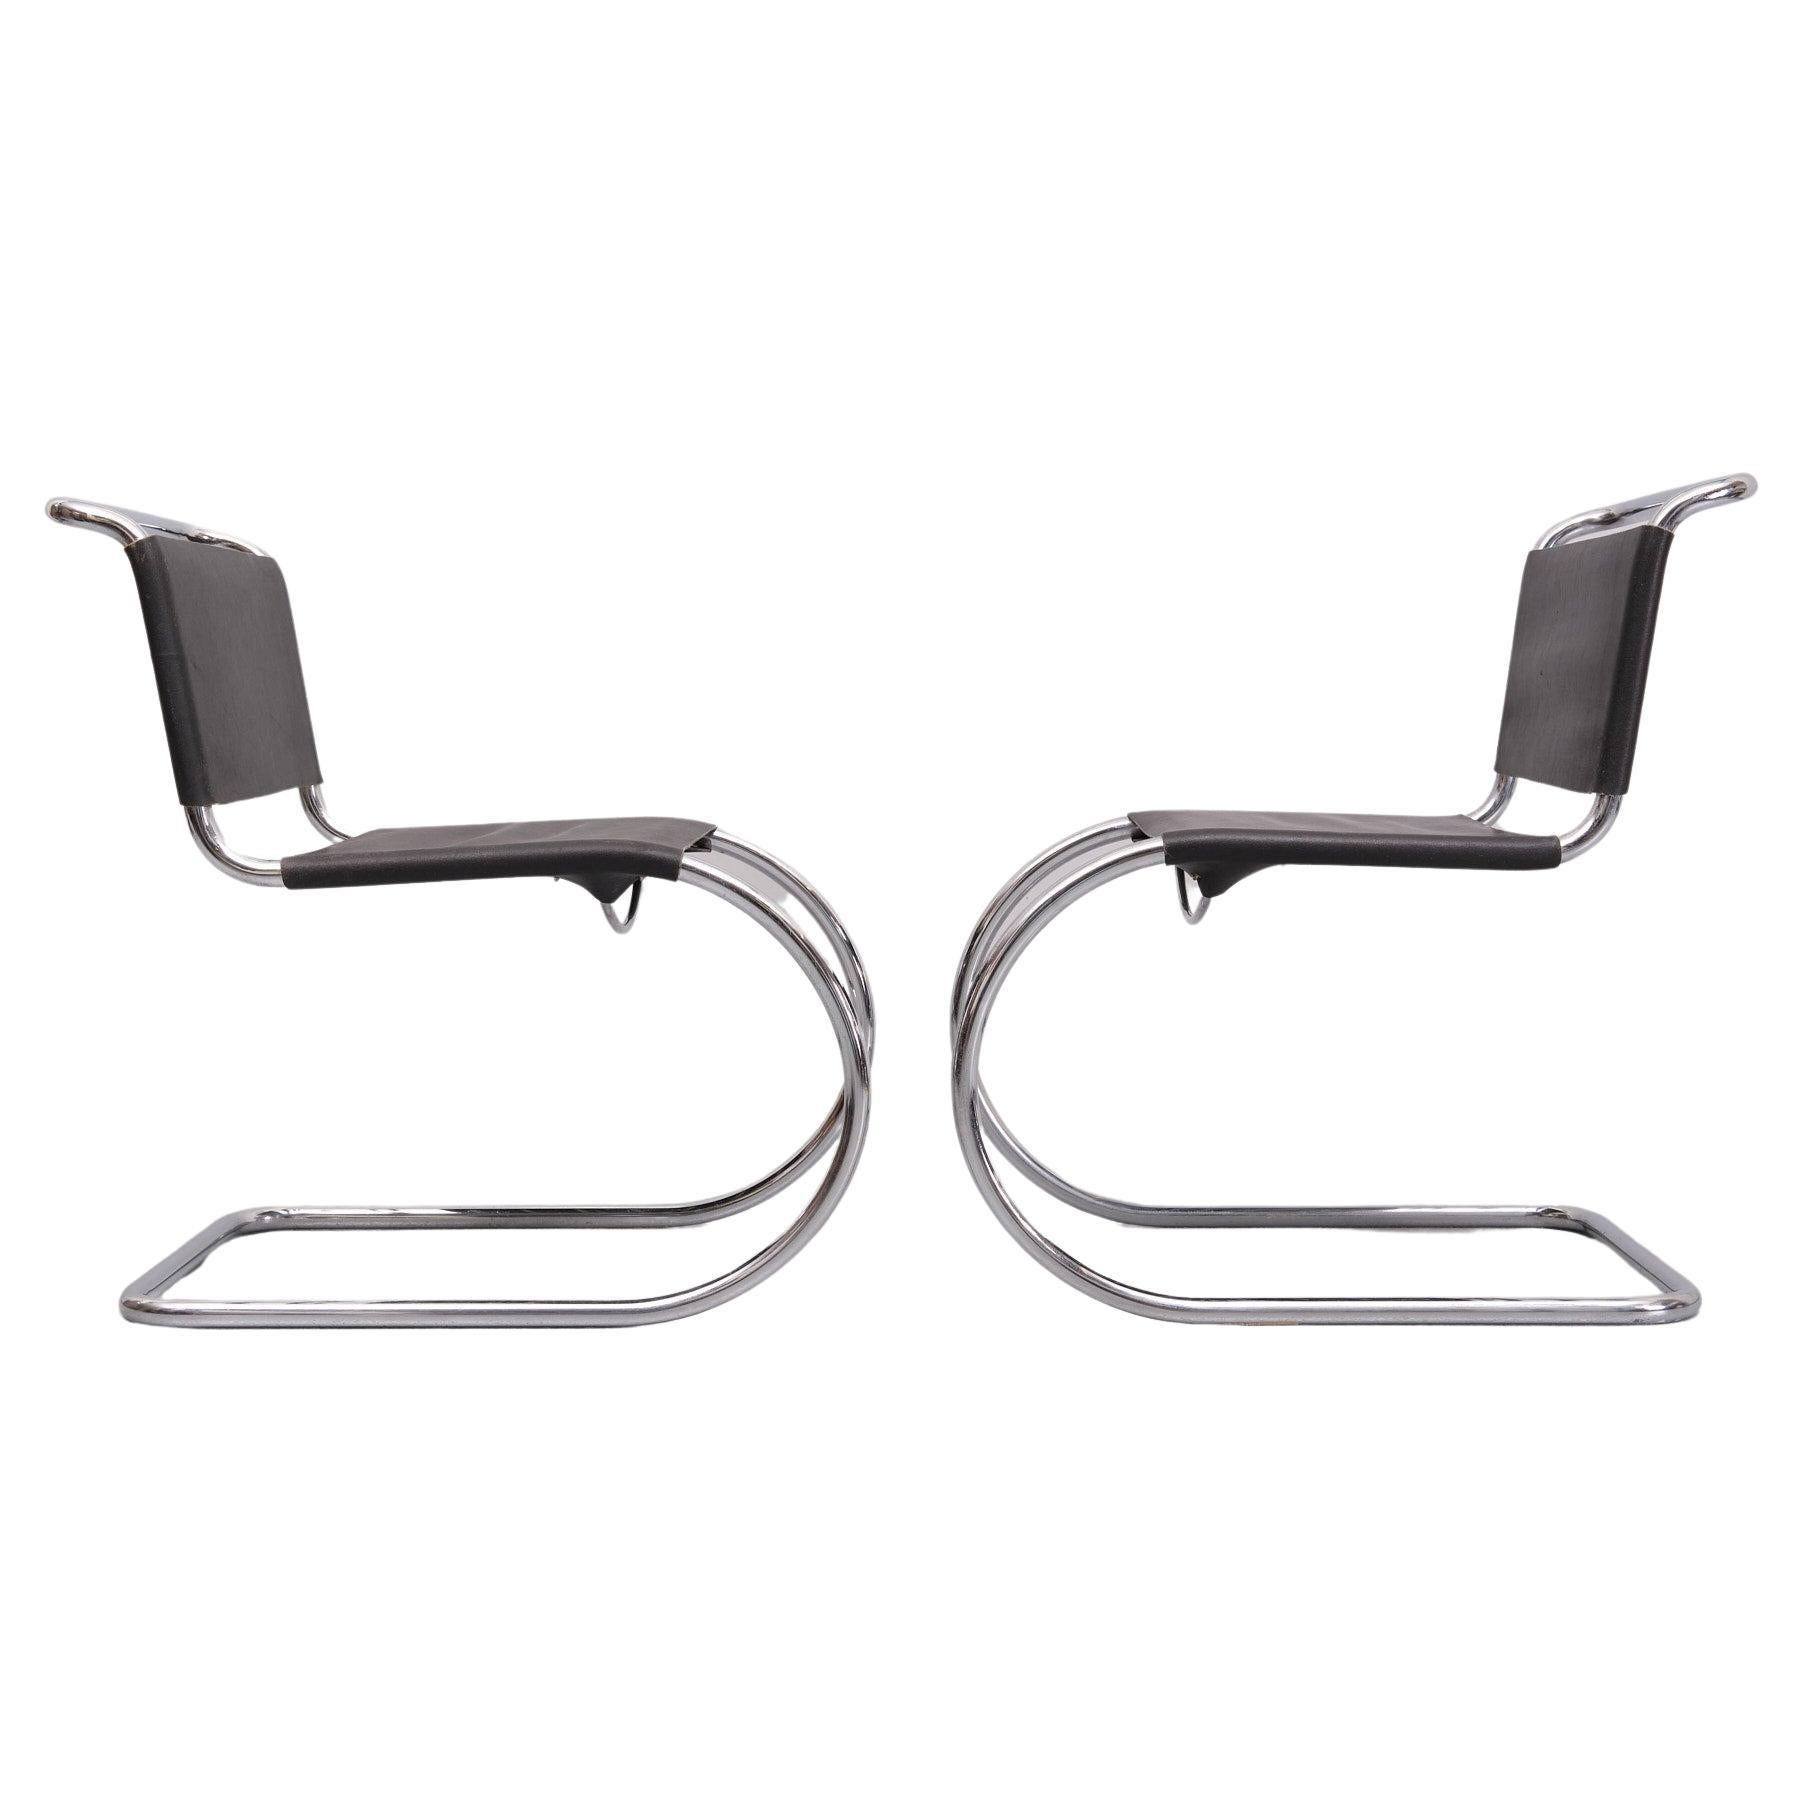 Early set Ludwig Mies van der Rohe  MR10 cantilever chairs 